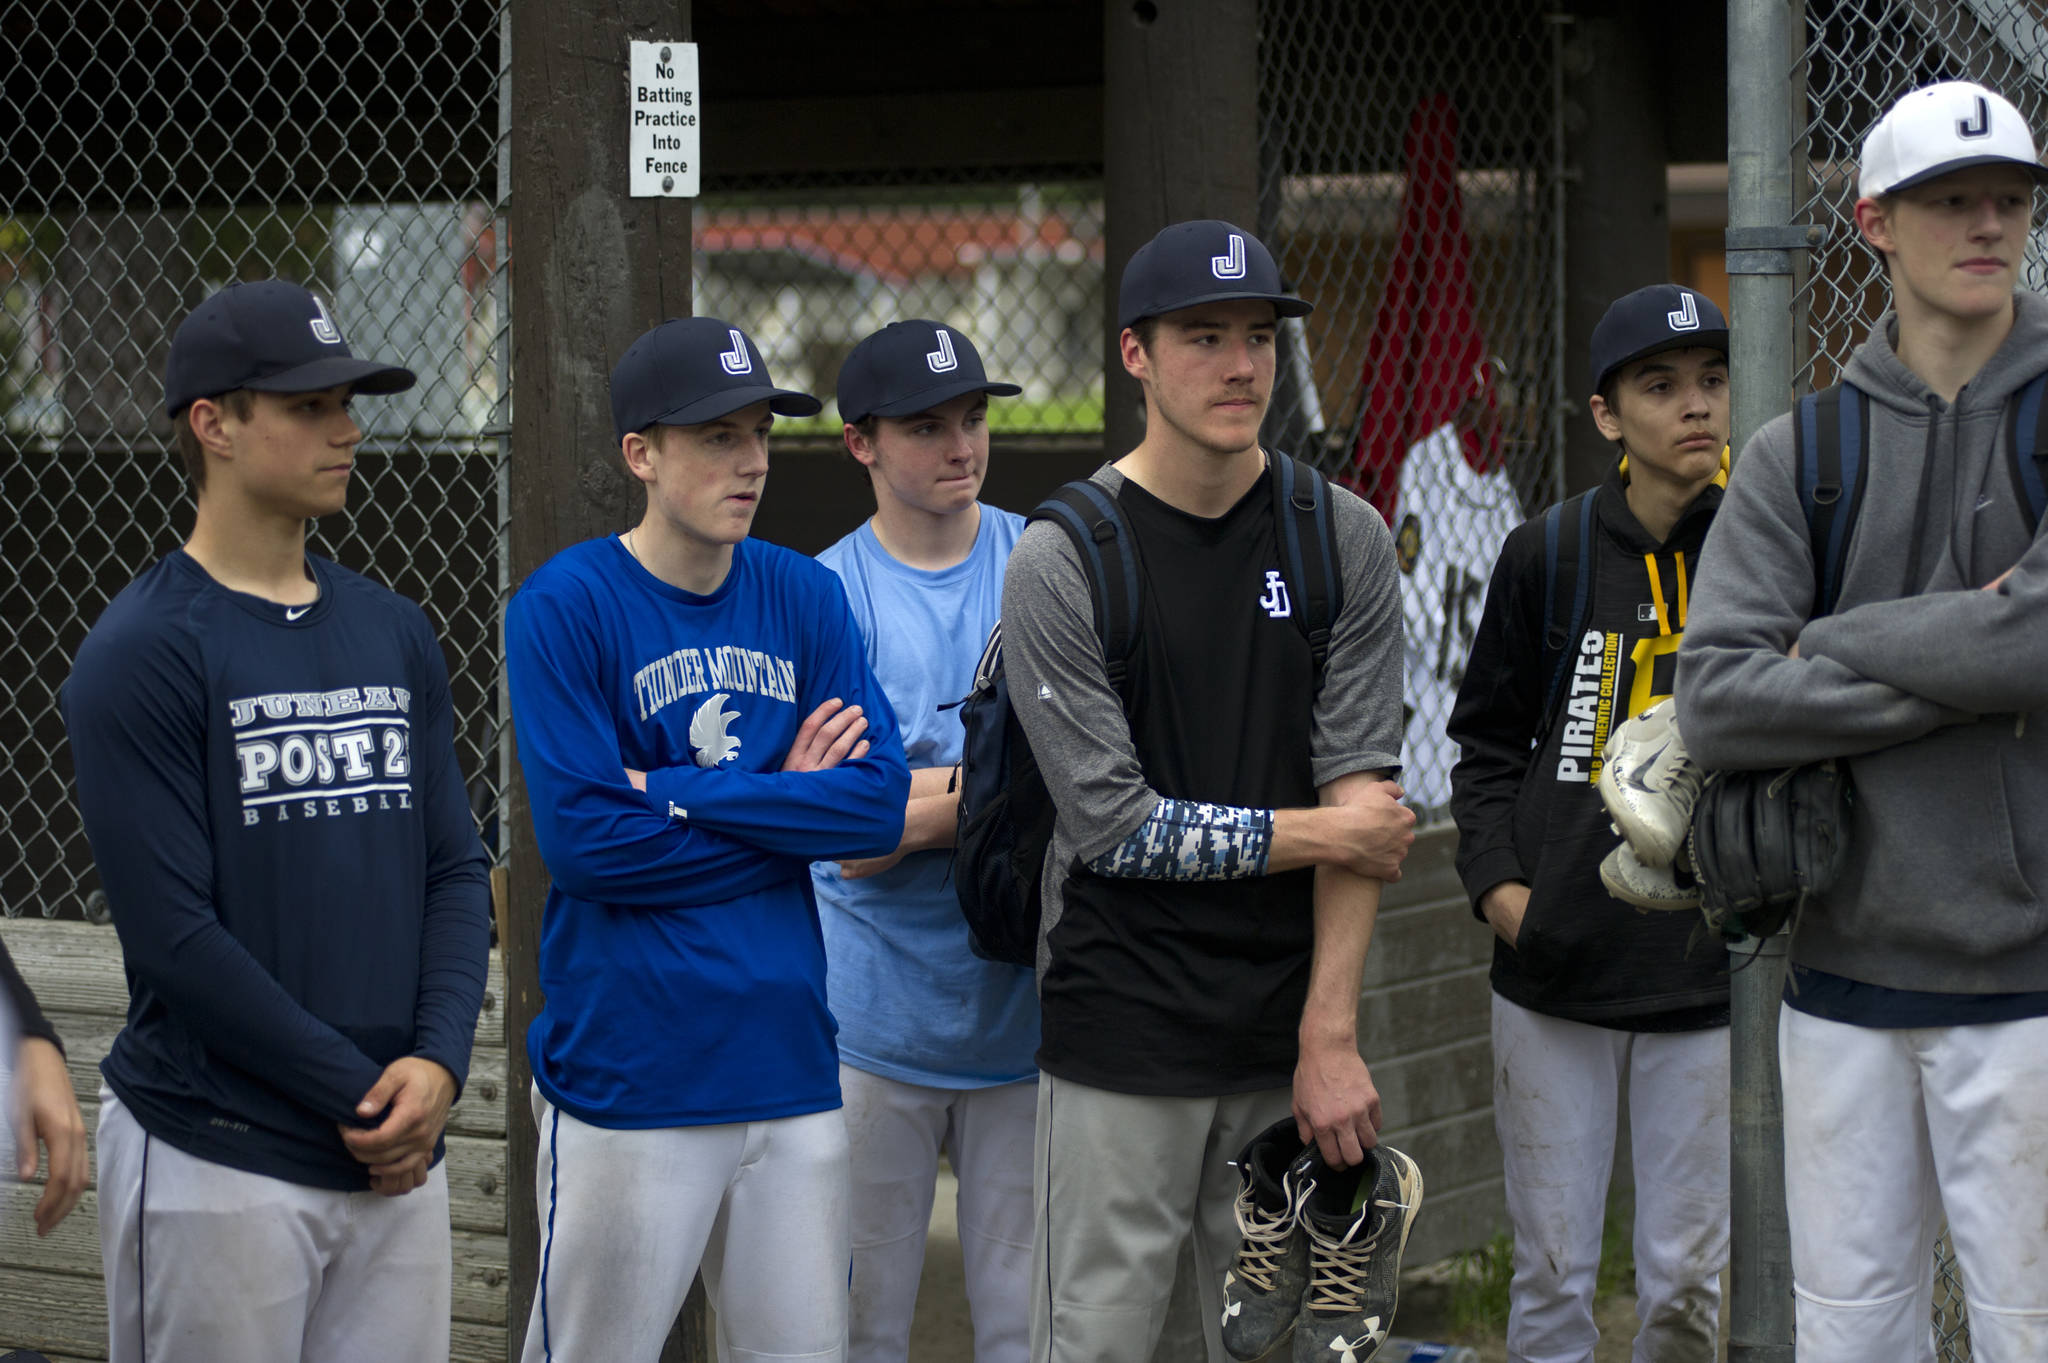 Juneau Post 25 players listen to the coaching staff after practice at Adair-Kennedy Memorial Park on Wednesday. (Nolin Ainsworth | Juneau Empire)